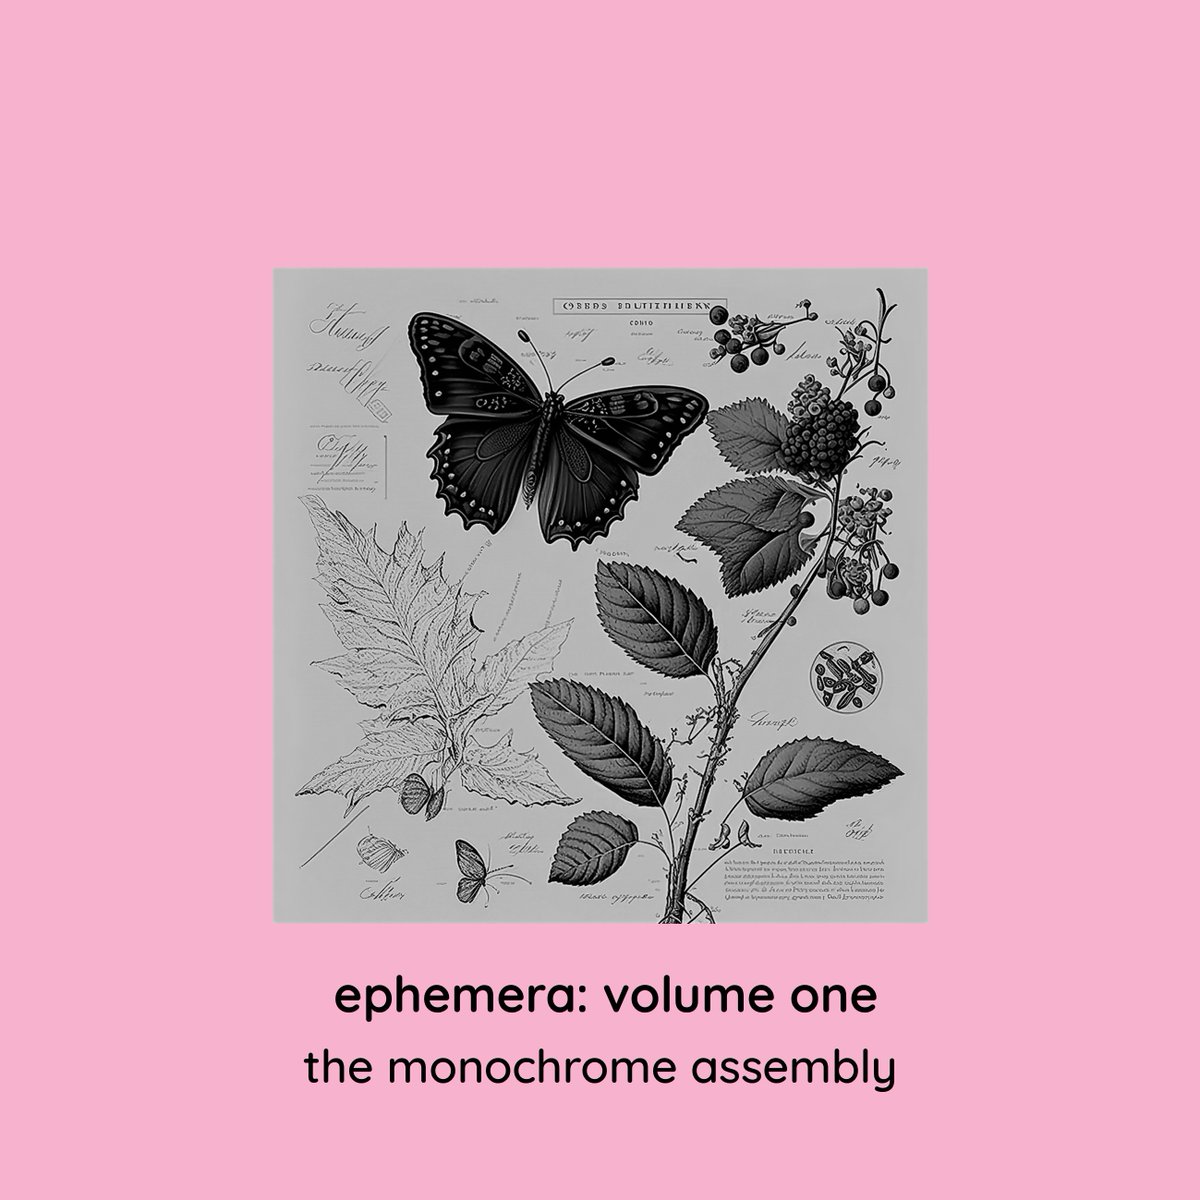 Let's tell you a bit more about Ephemera, our first Subscriber only album. Track 5 takes us on an ambient journey to 'A new Universe' from @Hipster_pug_ also previewing his album due later this year. monochromemotif.bandcamp.com/subscribe